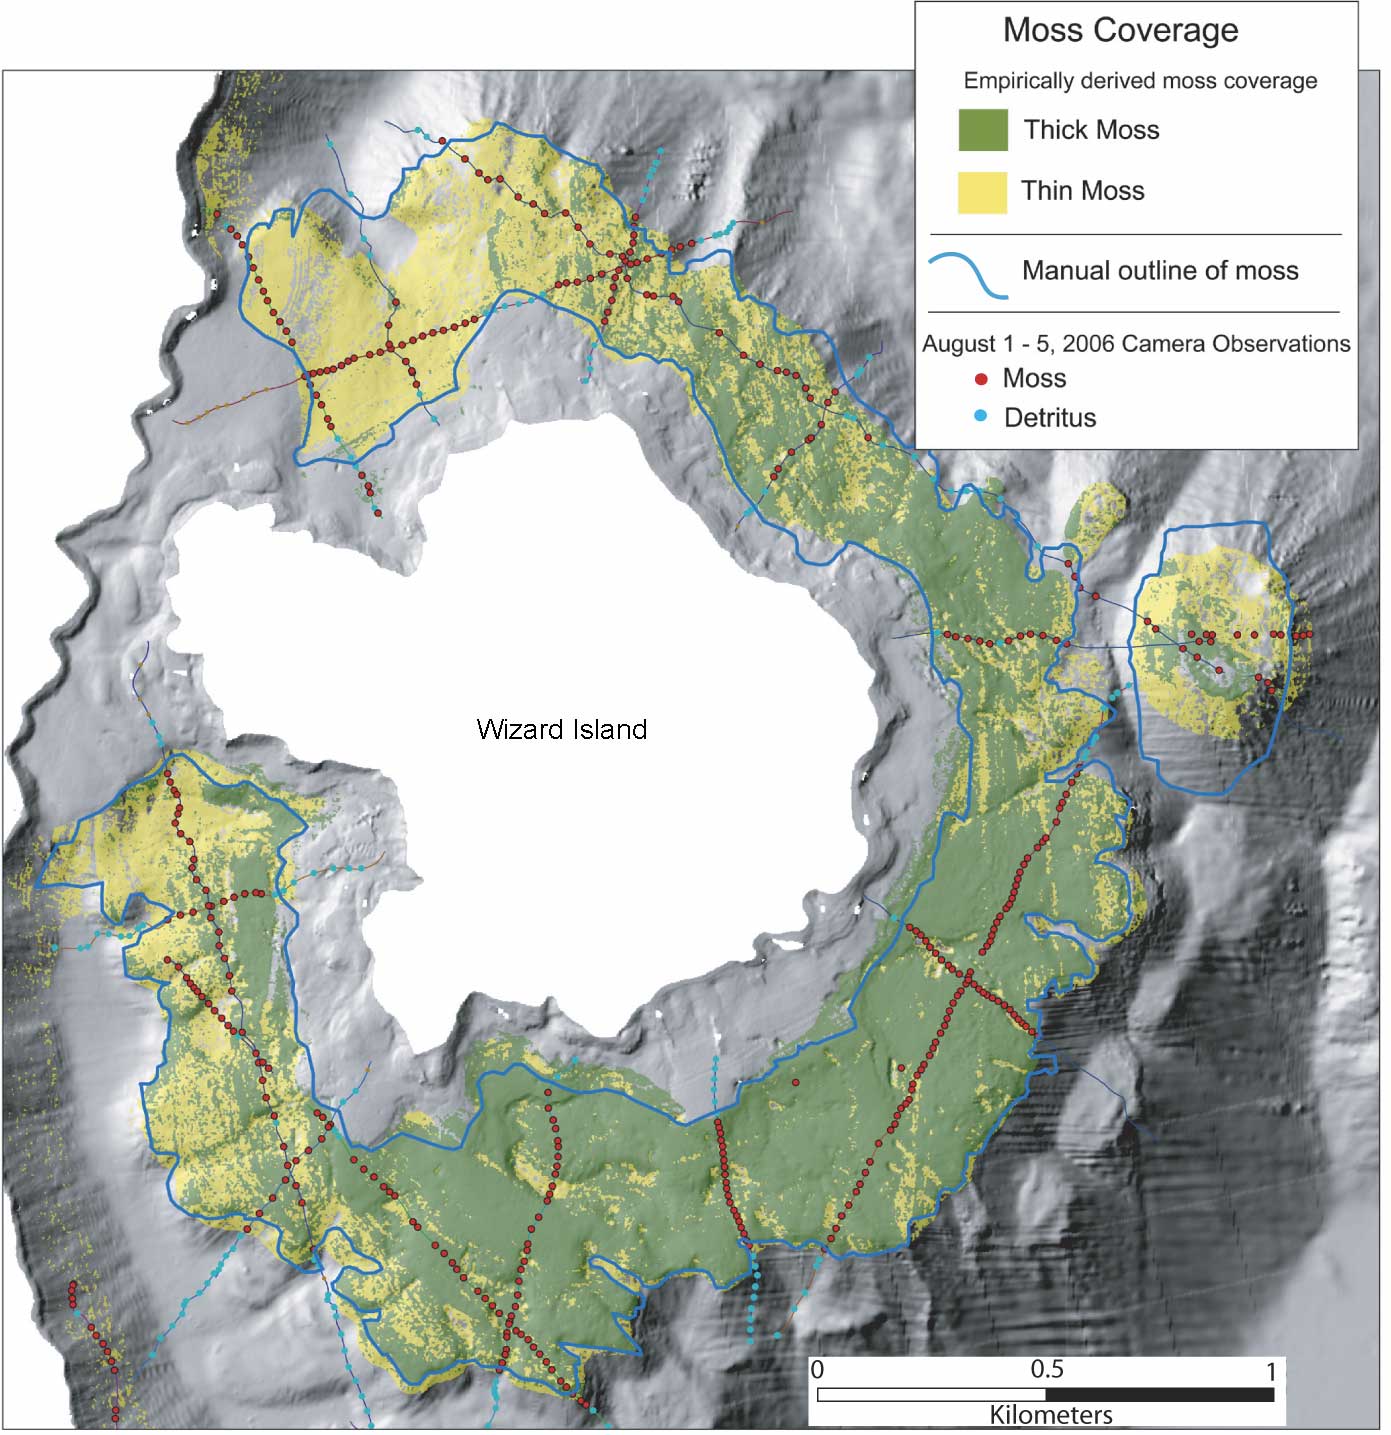 Figure 8. Coverage of Moss Over Wizard Island Platform, Crater Lake, Oregon